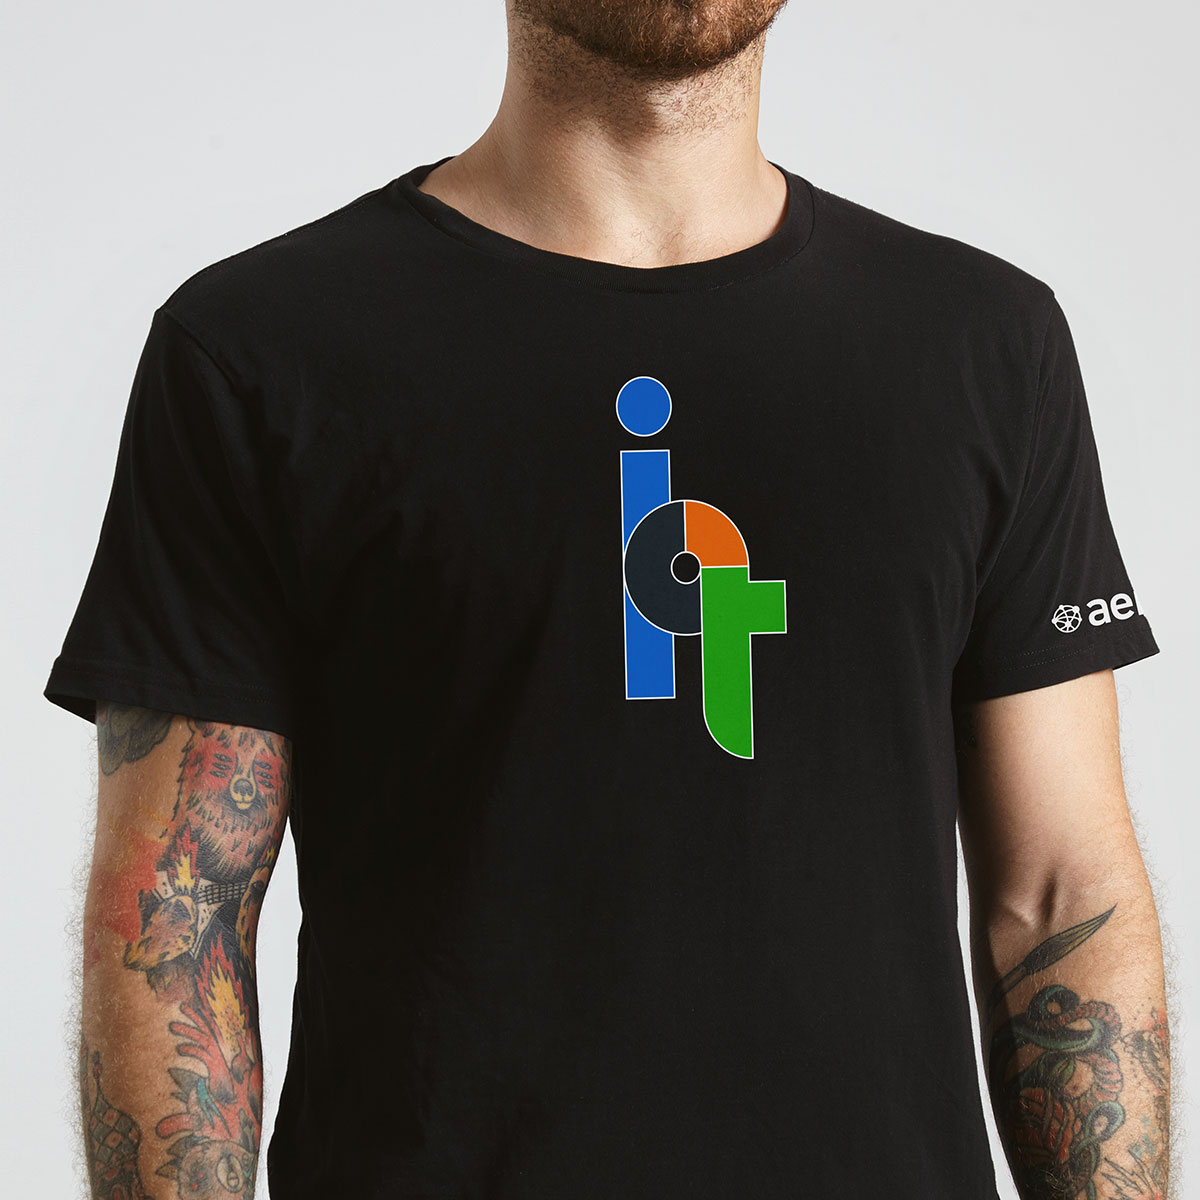 Aeris Internet of Things for Business 3rd Edition Book Campaign – T-Shirt Design (Front)